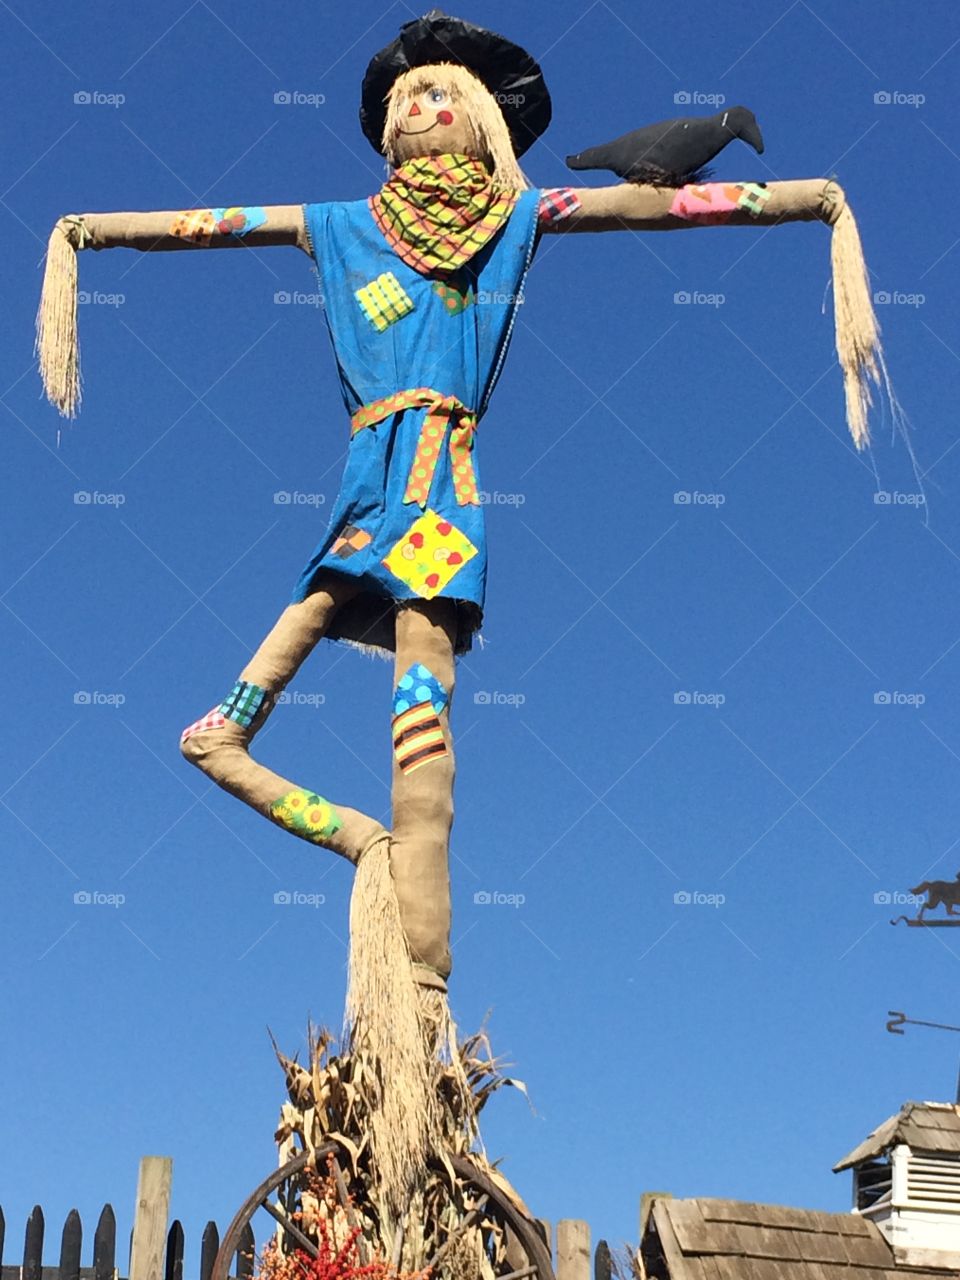 This scarecrow will keep the crows away on a beautiful blue sky autumn day.